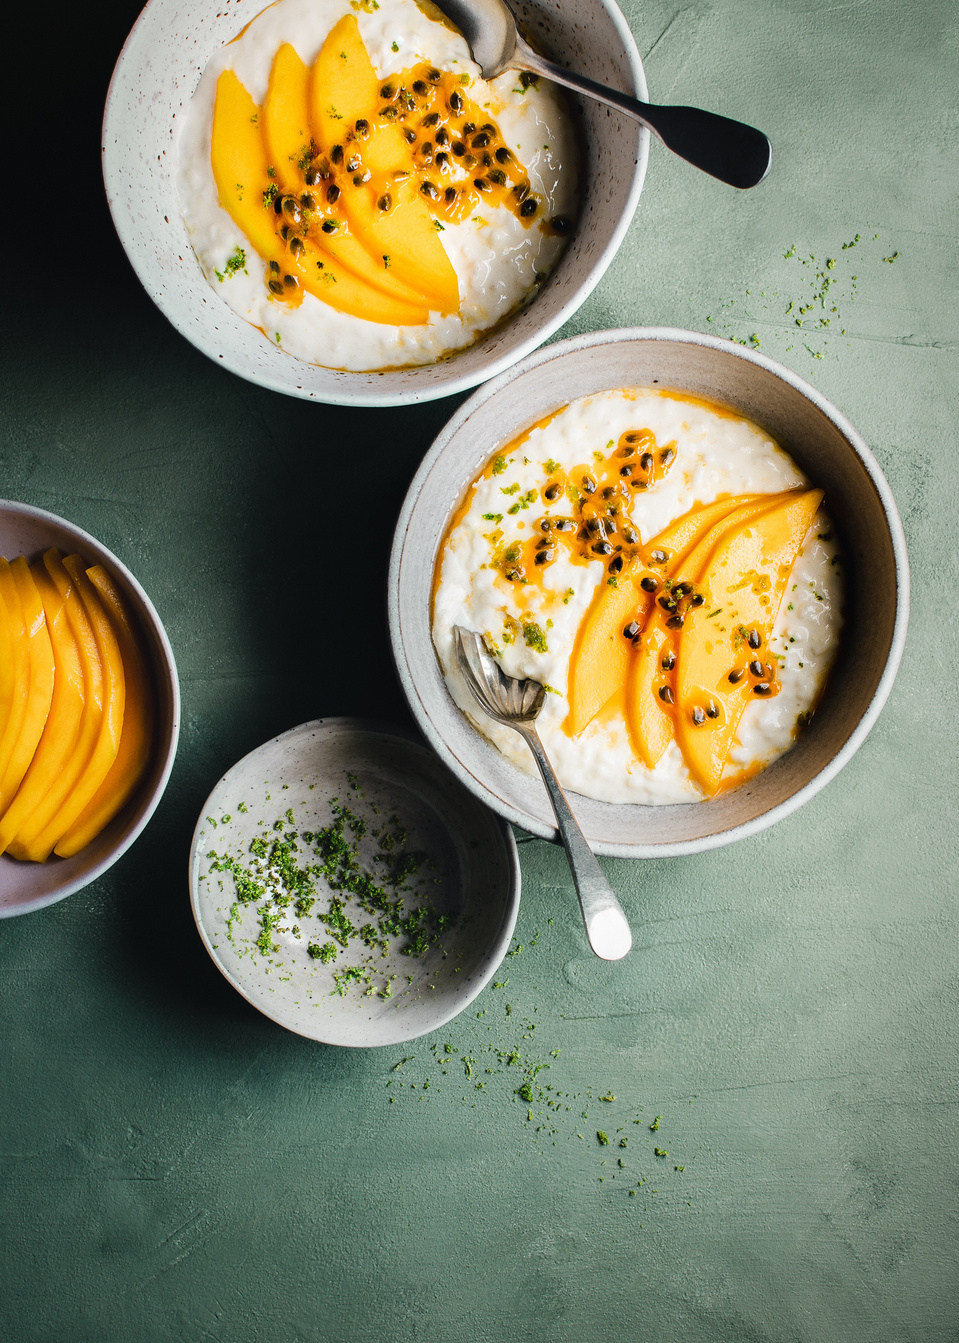 Elise Humphrey - food photographer - bowls of mango passion fruit and lime rice pudding on a painted green backdrop